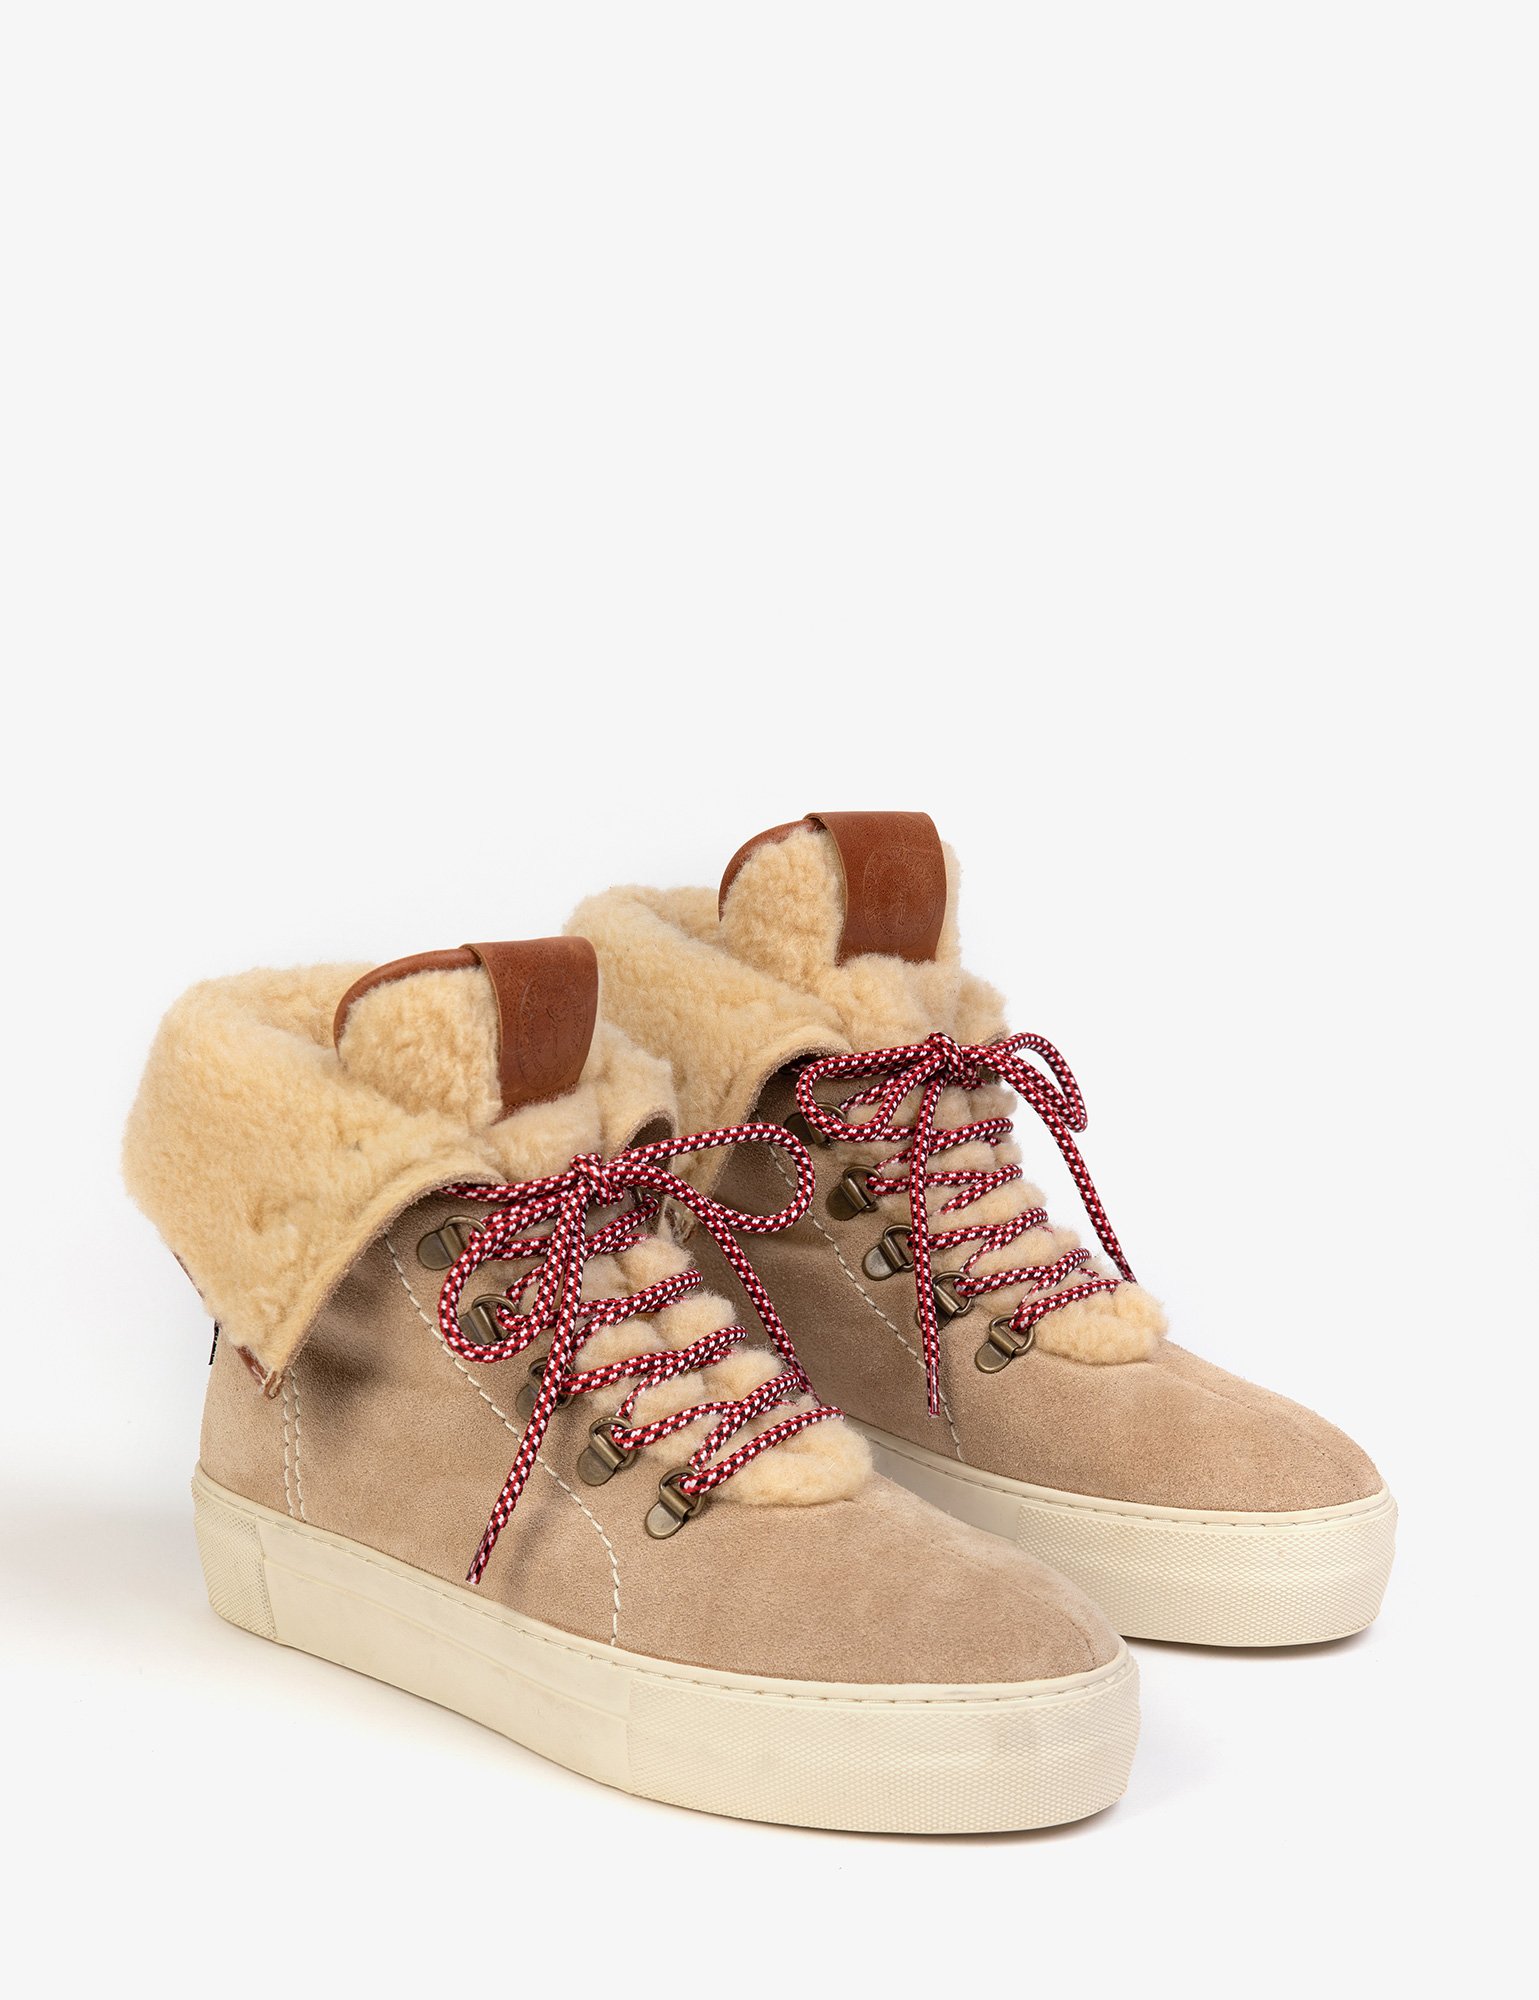 Phoenix Wool-Lined Suede Boot- Sand| Womens Boot |Penelope Chilvers